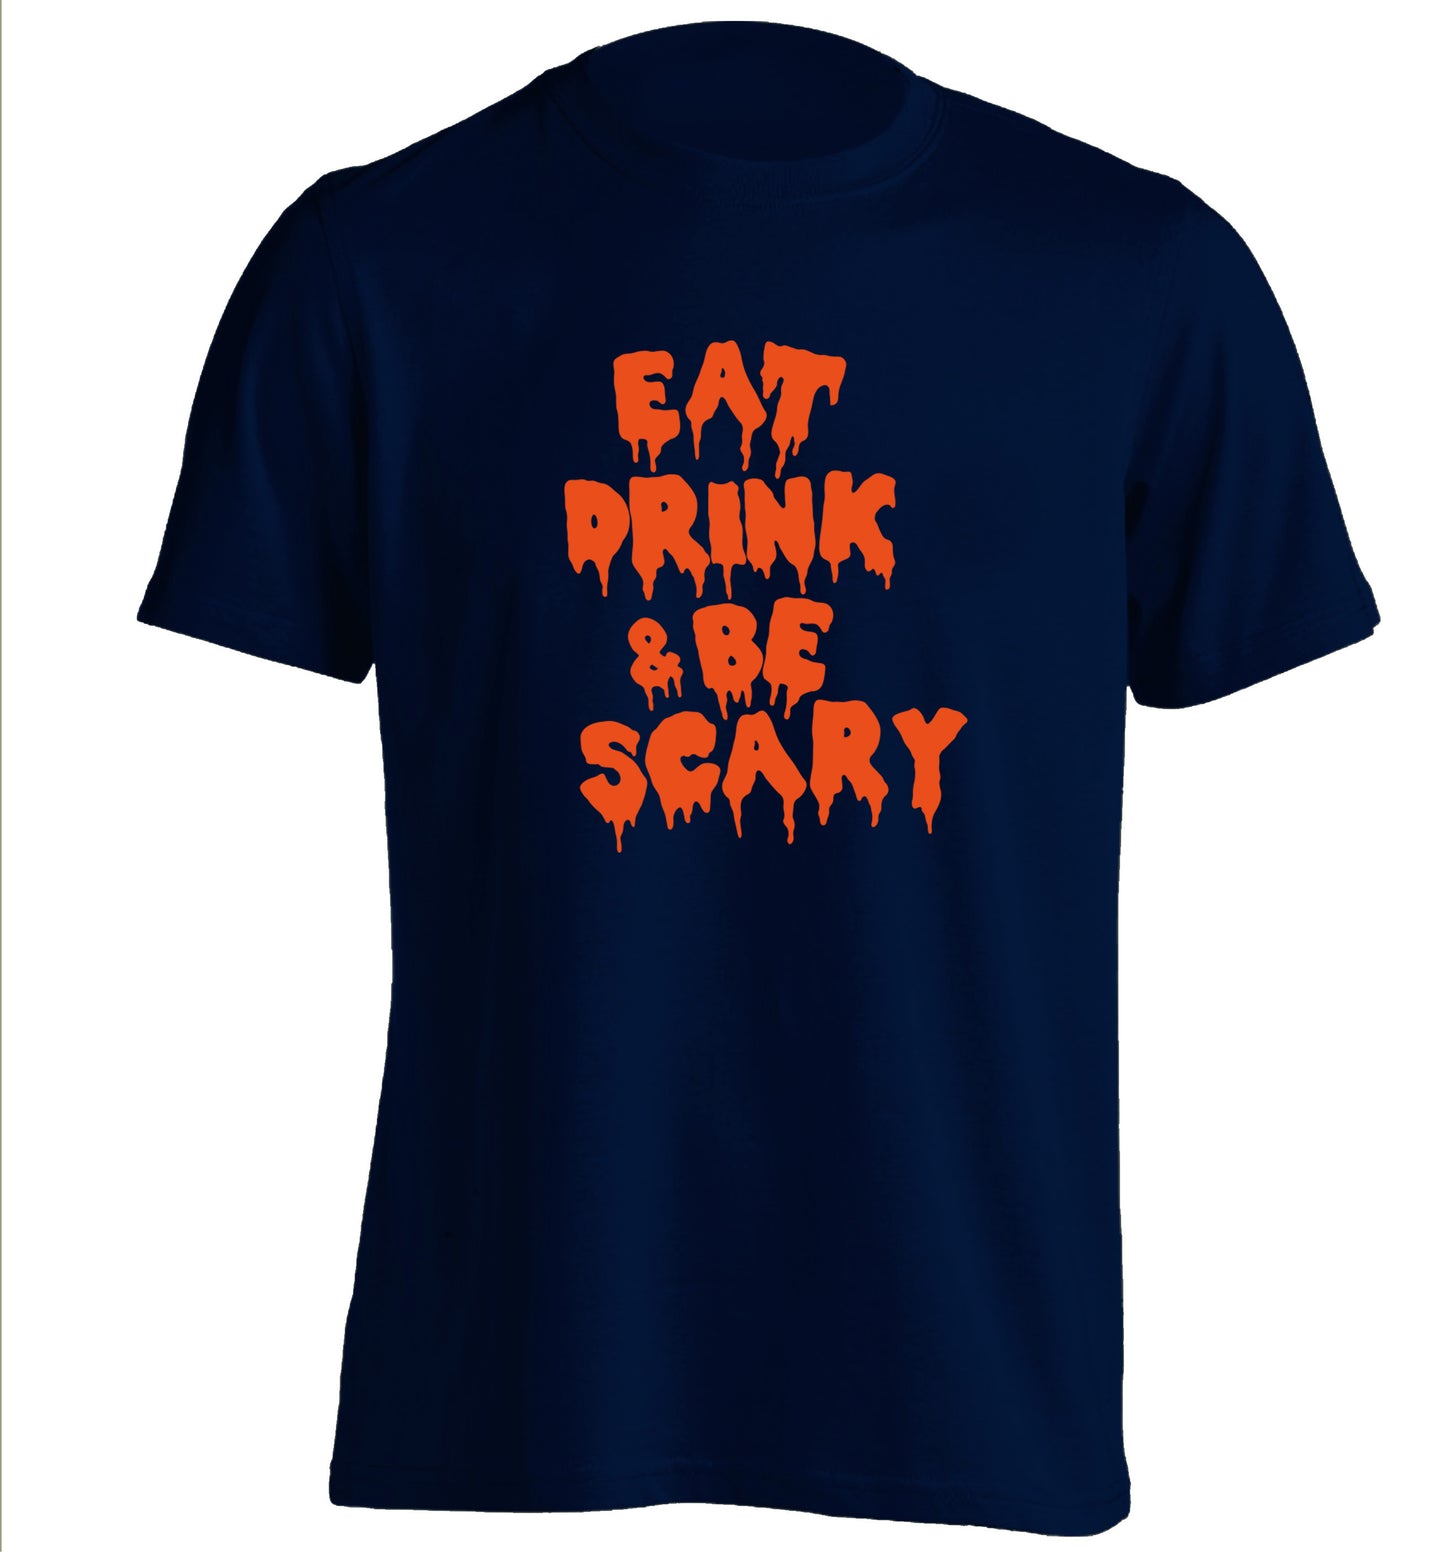 Eat drink and be scary adults unisex navy Tshirt 2XL